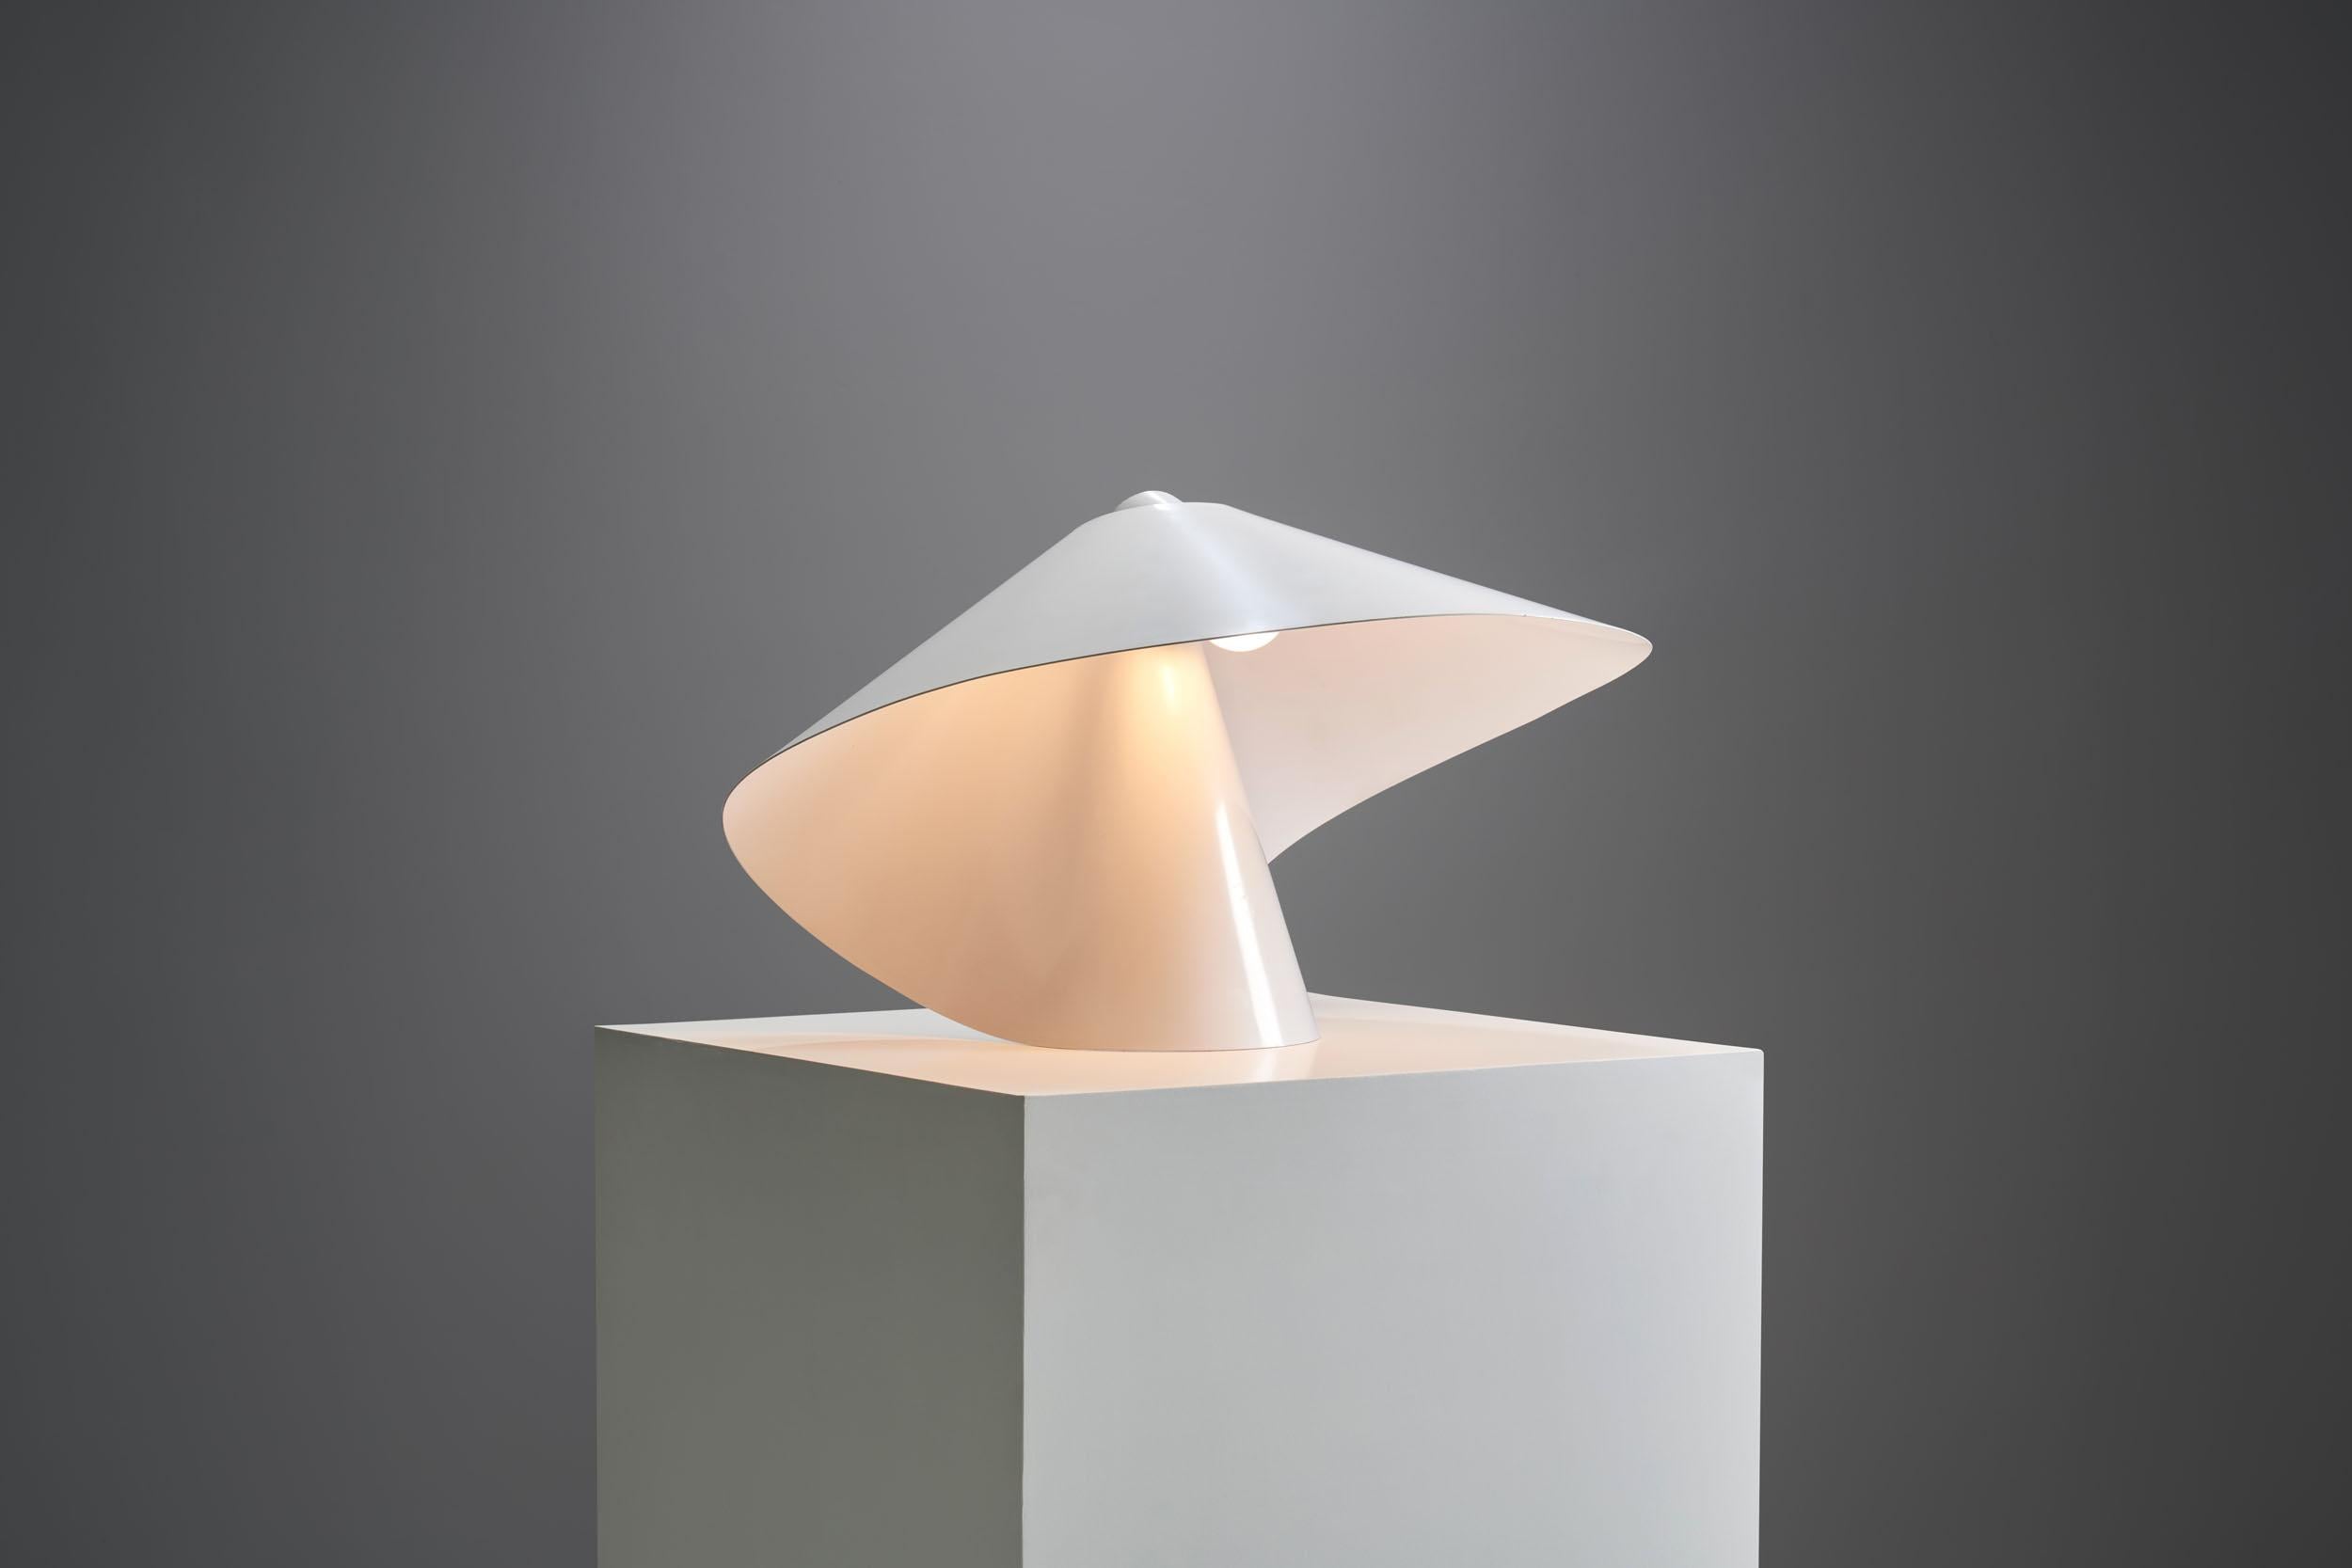 This original edition light sculpture “D625”, better known as the “Nonne” lamp is among the most emblematic creations of Raoul Raba and a famous example of timeless modernity. 

Light sculpture is the only fitting description for this lamp, for as